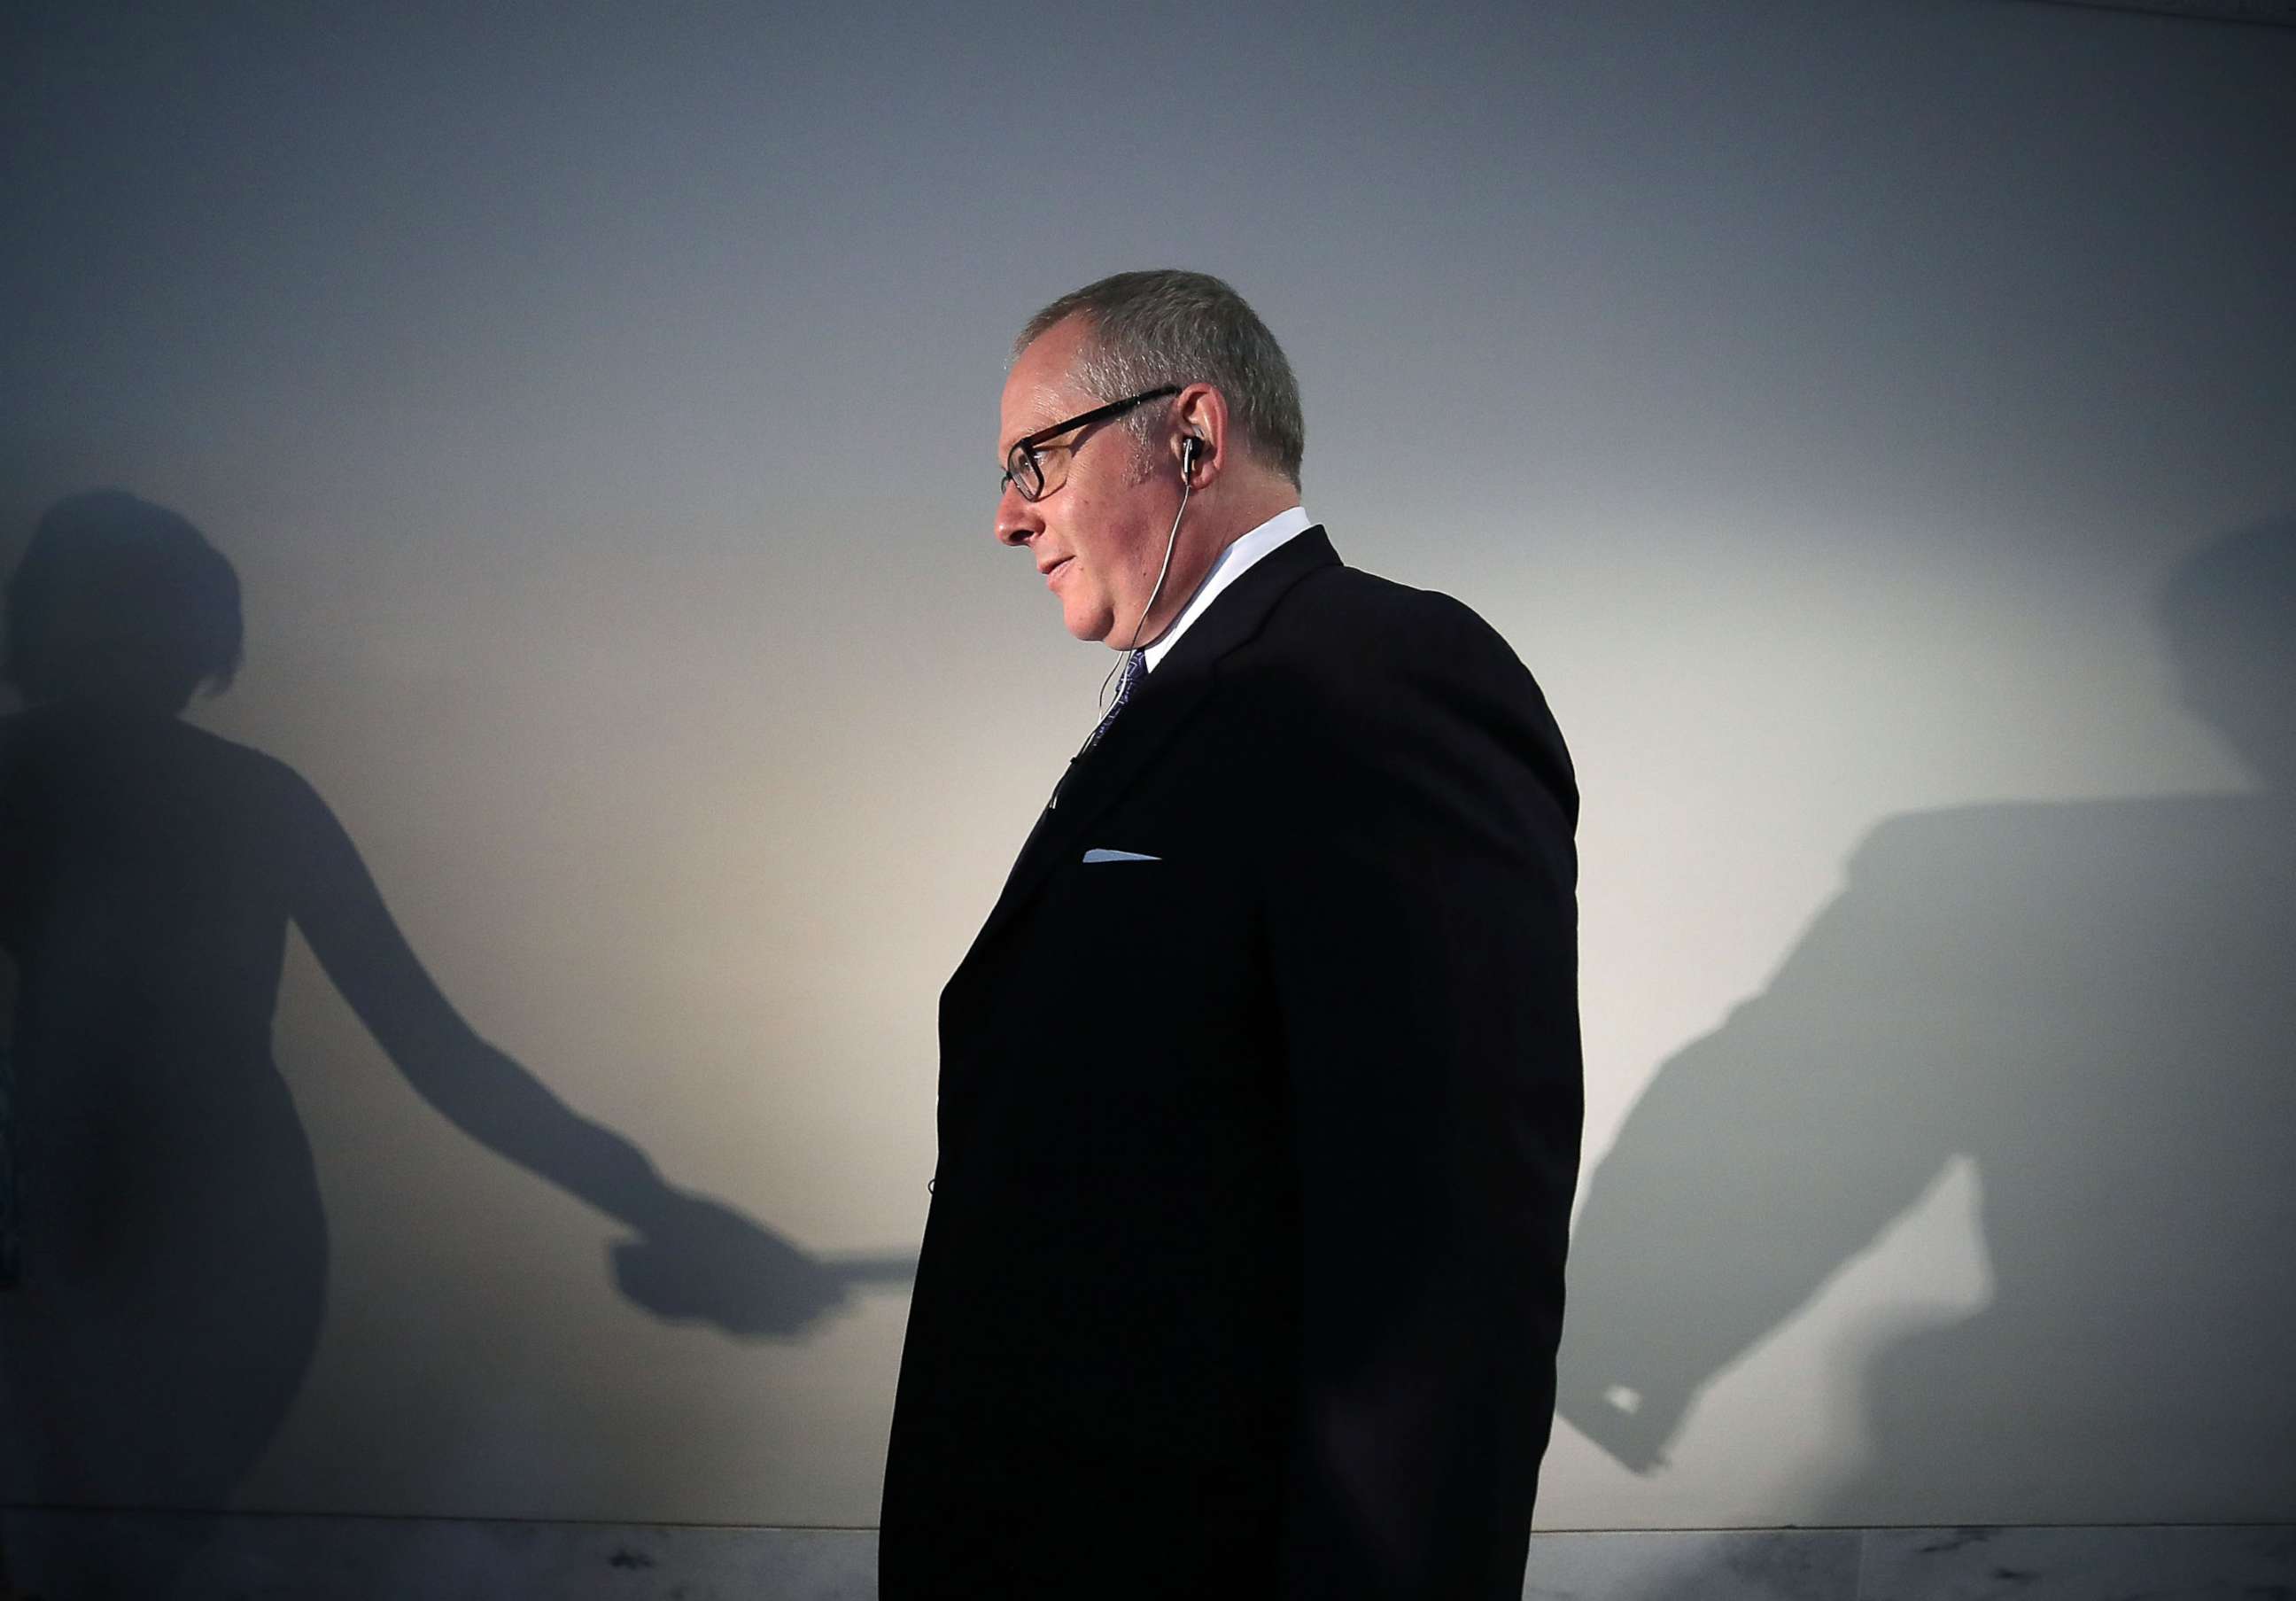 PHOTO: Former Trump campaign official Michael Caputo arrives at the Hart Senate Office building to be interviewed by Senate Intelligence Committee staffers, on May 1, 2018, in Washington.